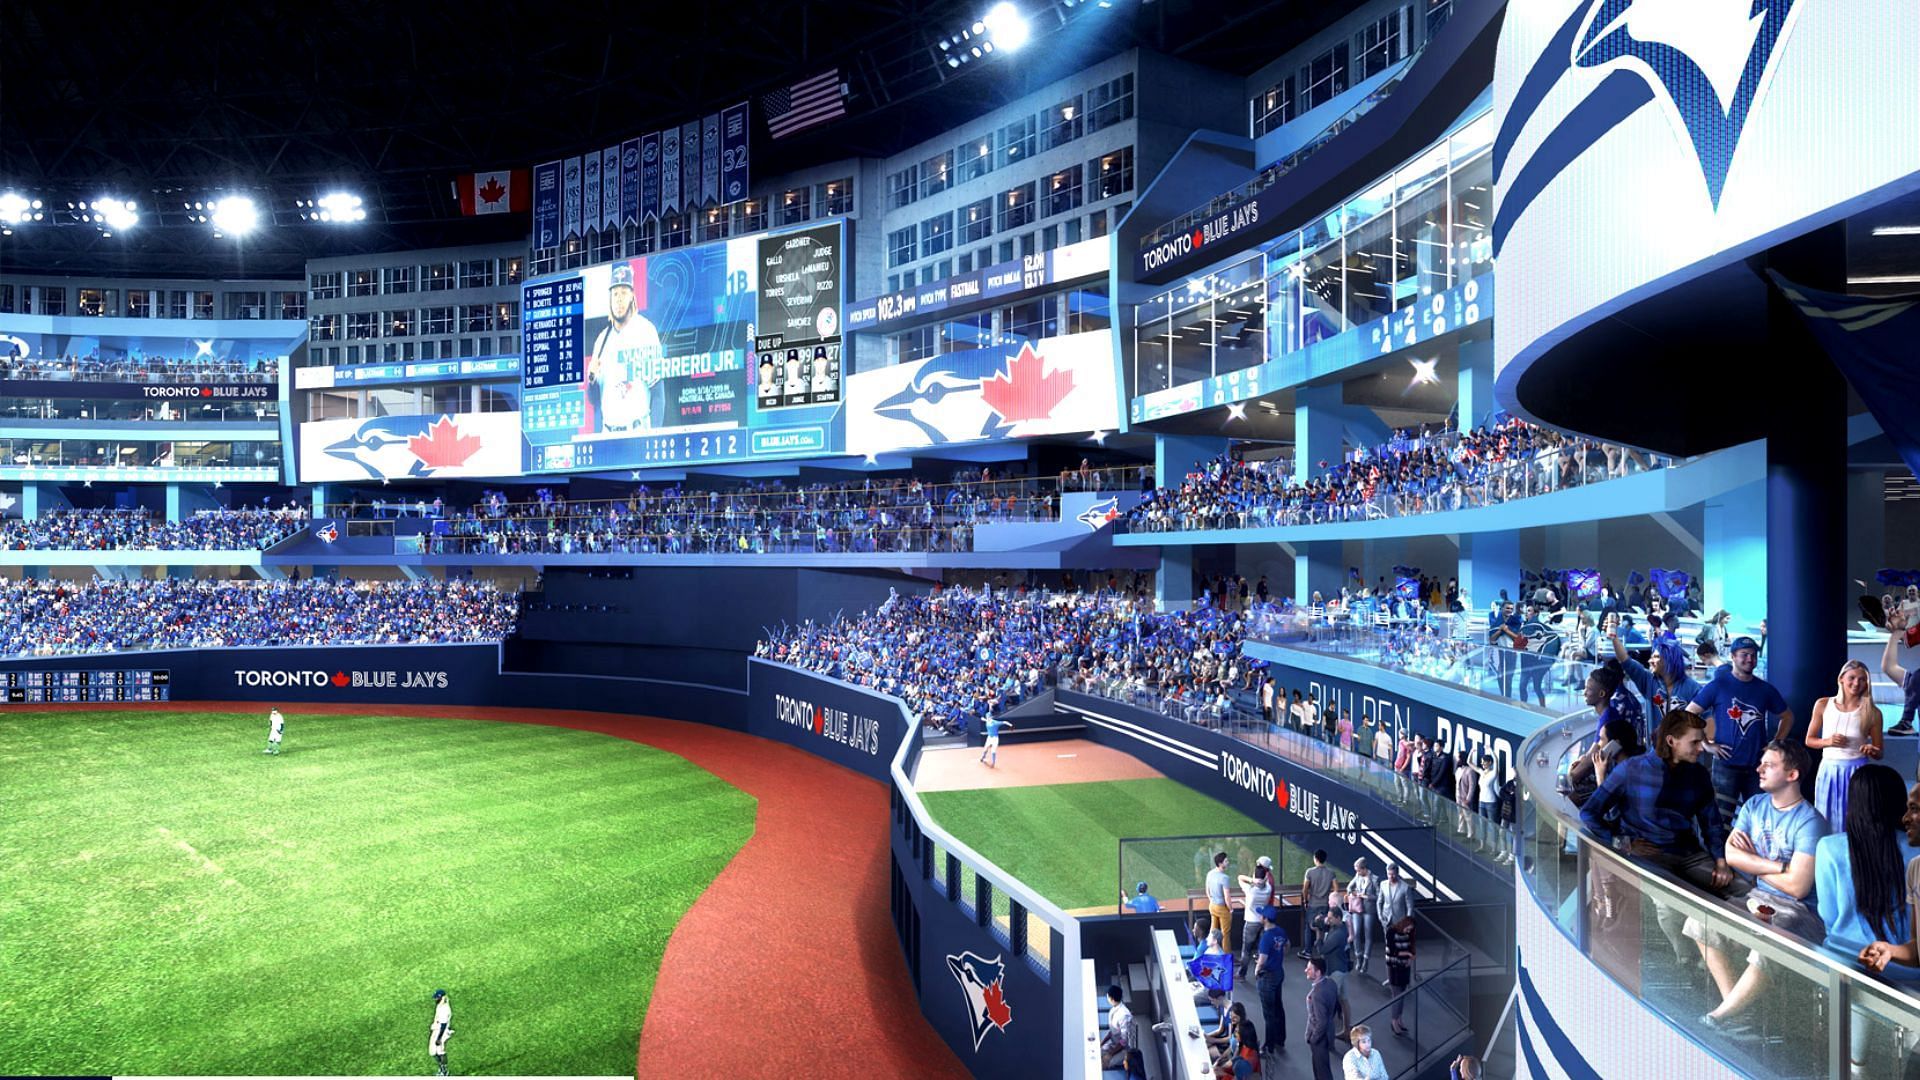 Gallagher: A Rogers Centre reno, Populous will try to 'Make it Right' —  Canadian Baseball Network